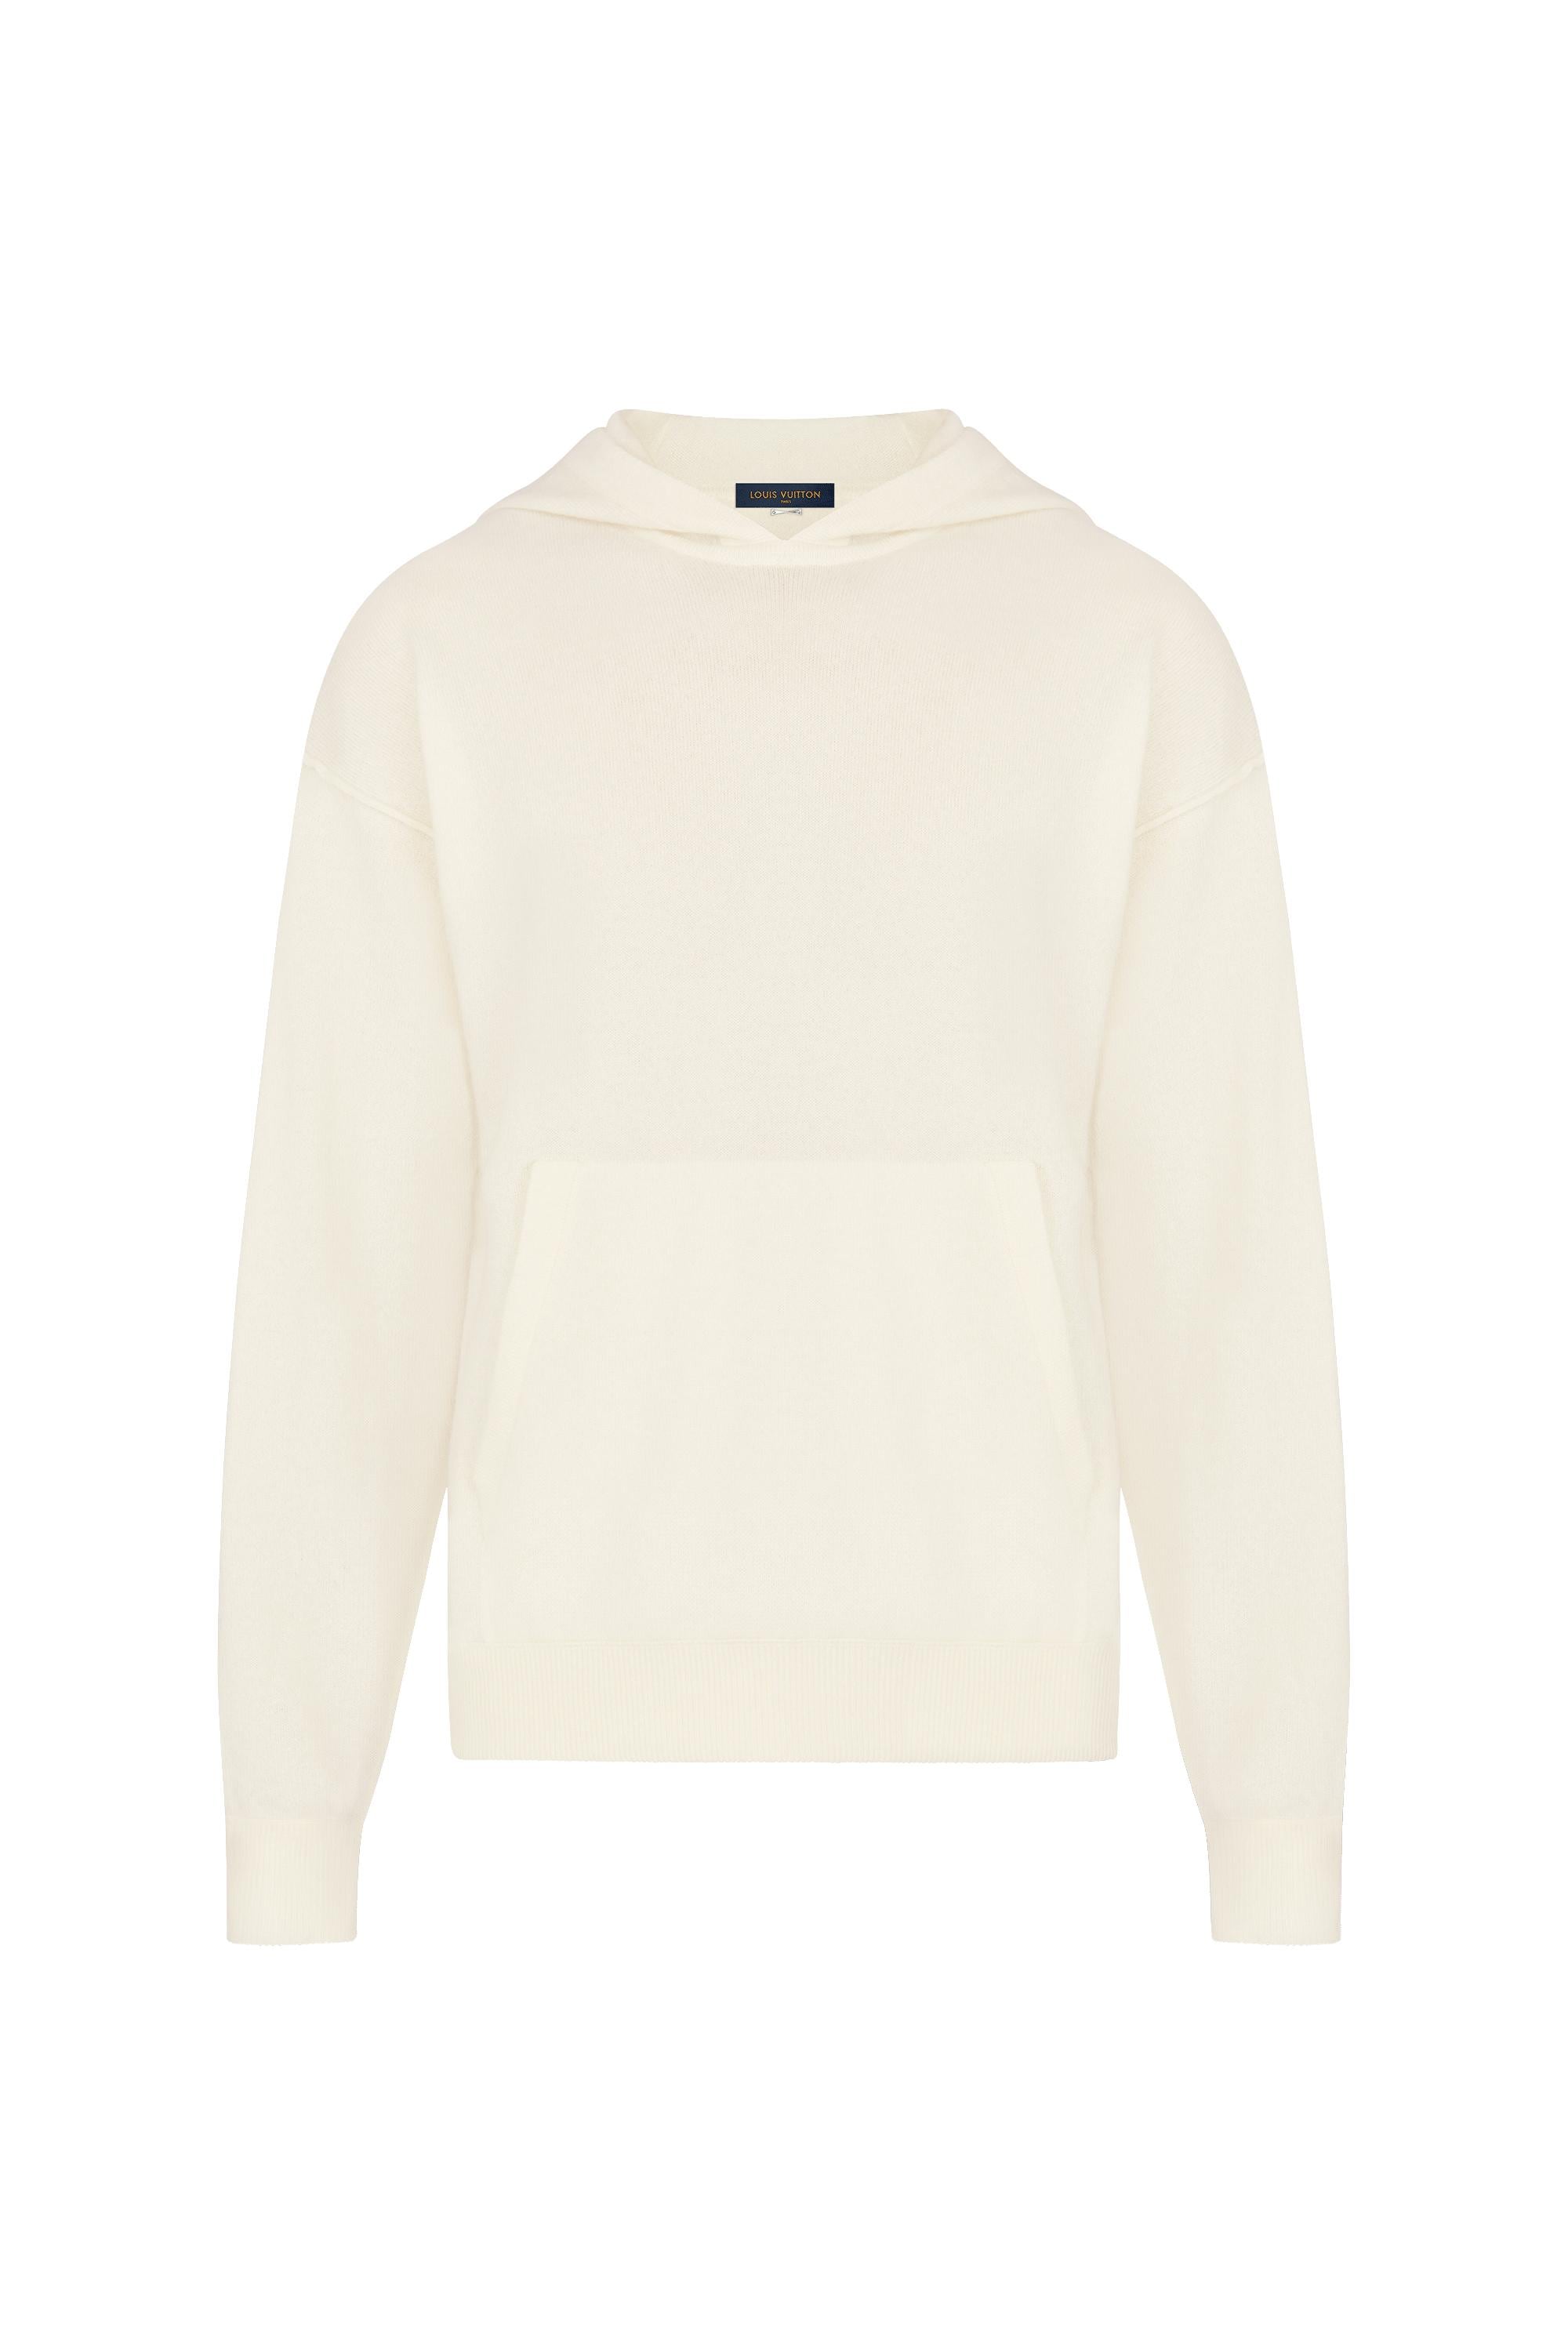 Louis Vuitton INSIDE OUT CASHMERE HOODIE – Men – Ready-to-Wear 1A5CJX Milk White